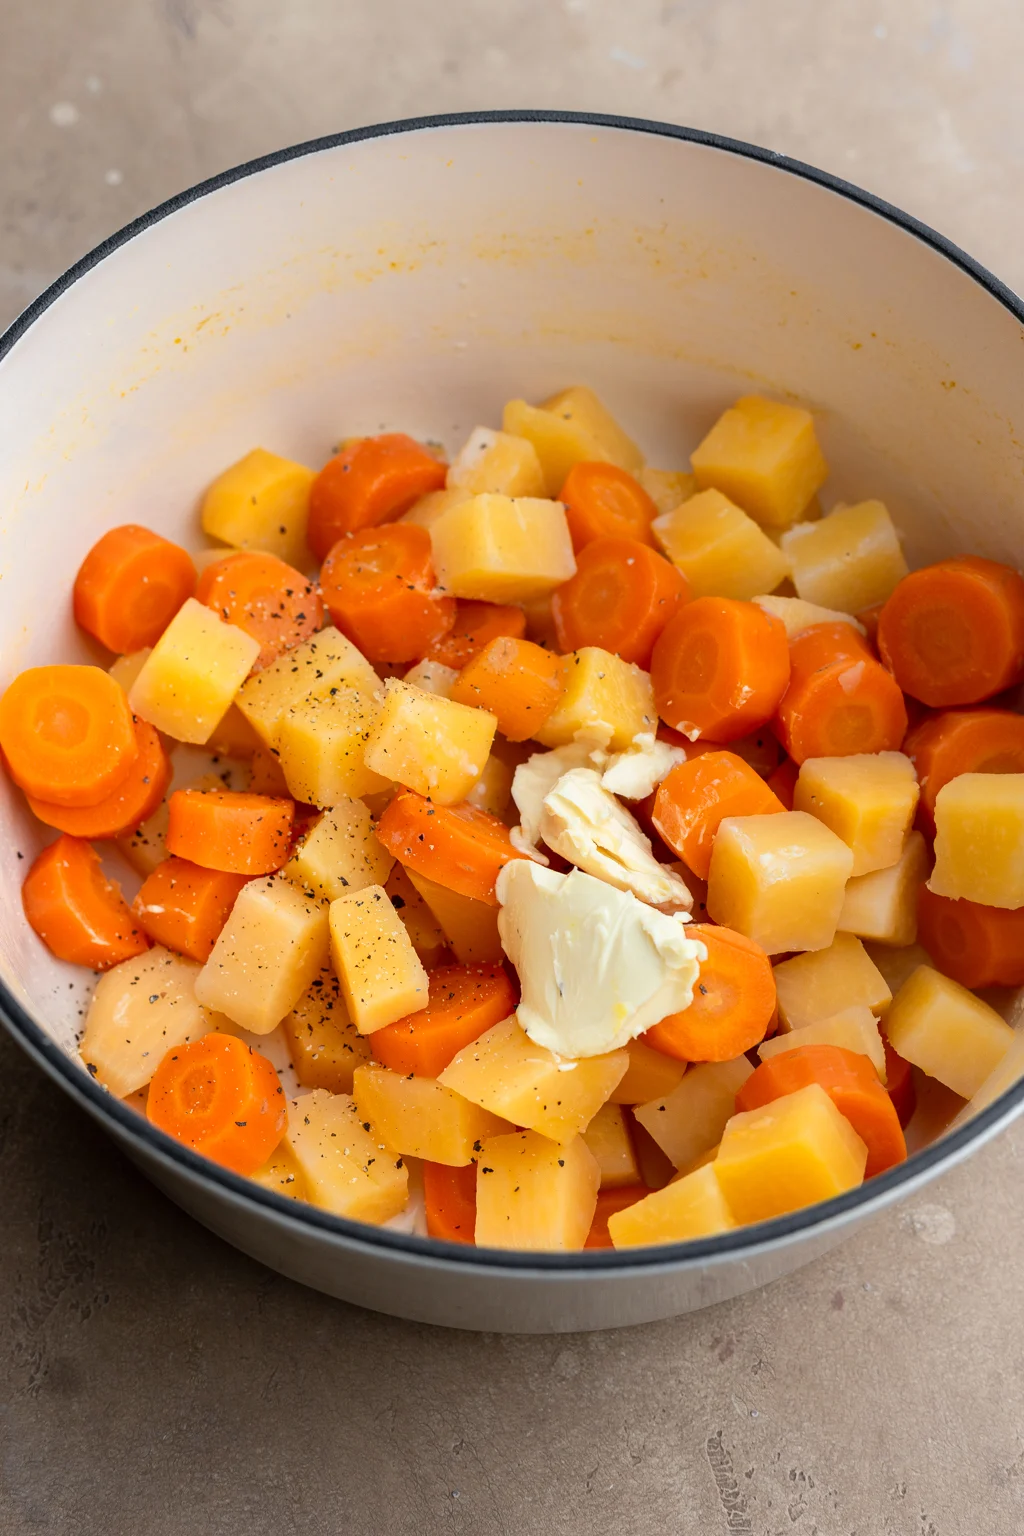 Carrot and Swede Mash Ingredients in Pan